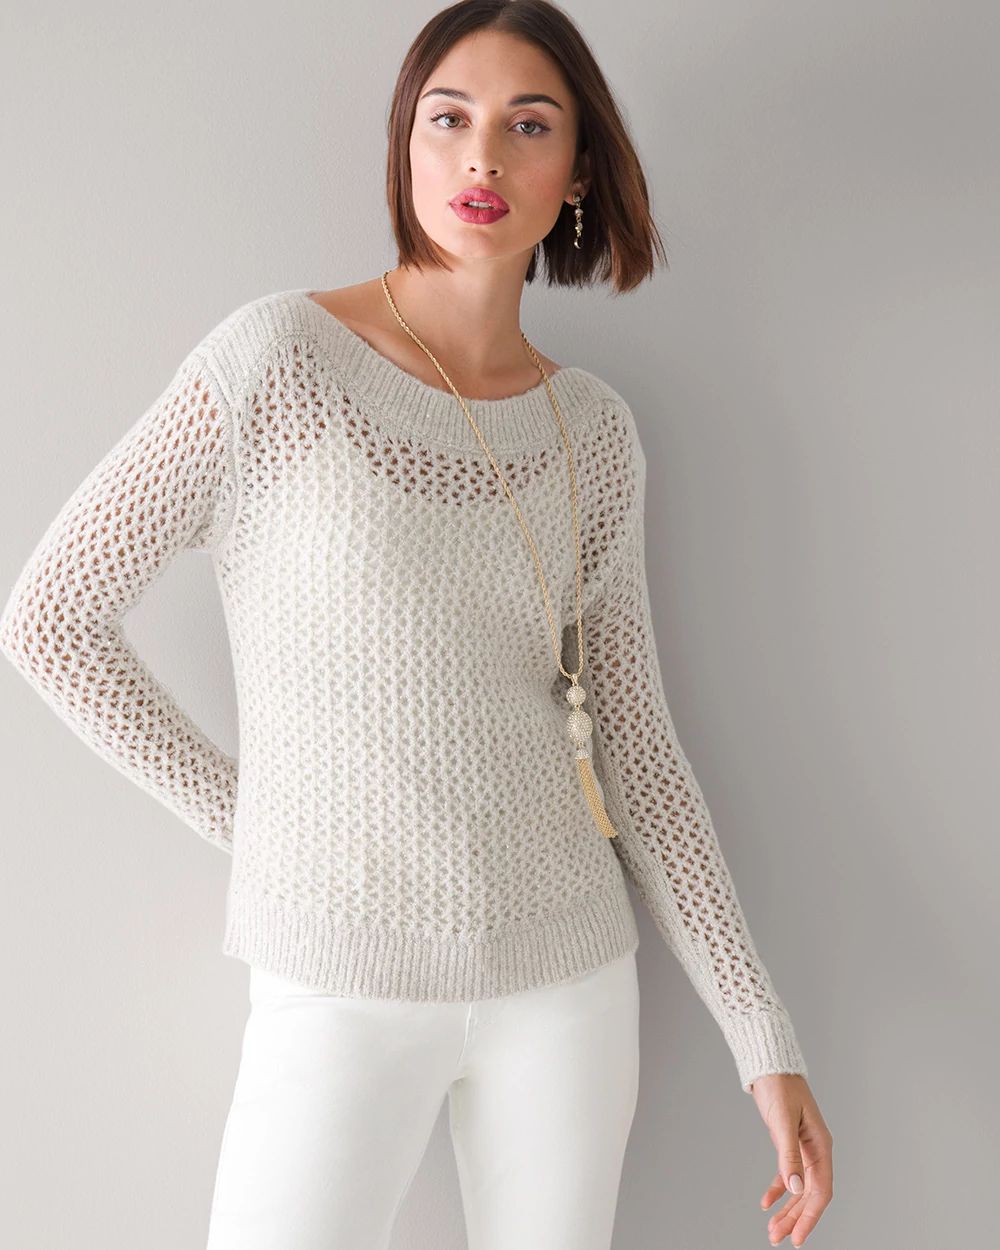 Open Stitch Bateau Sweater click to view larger image.